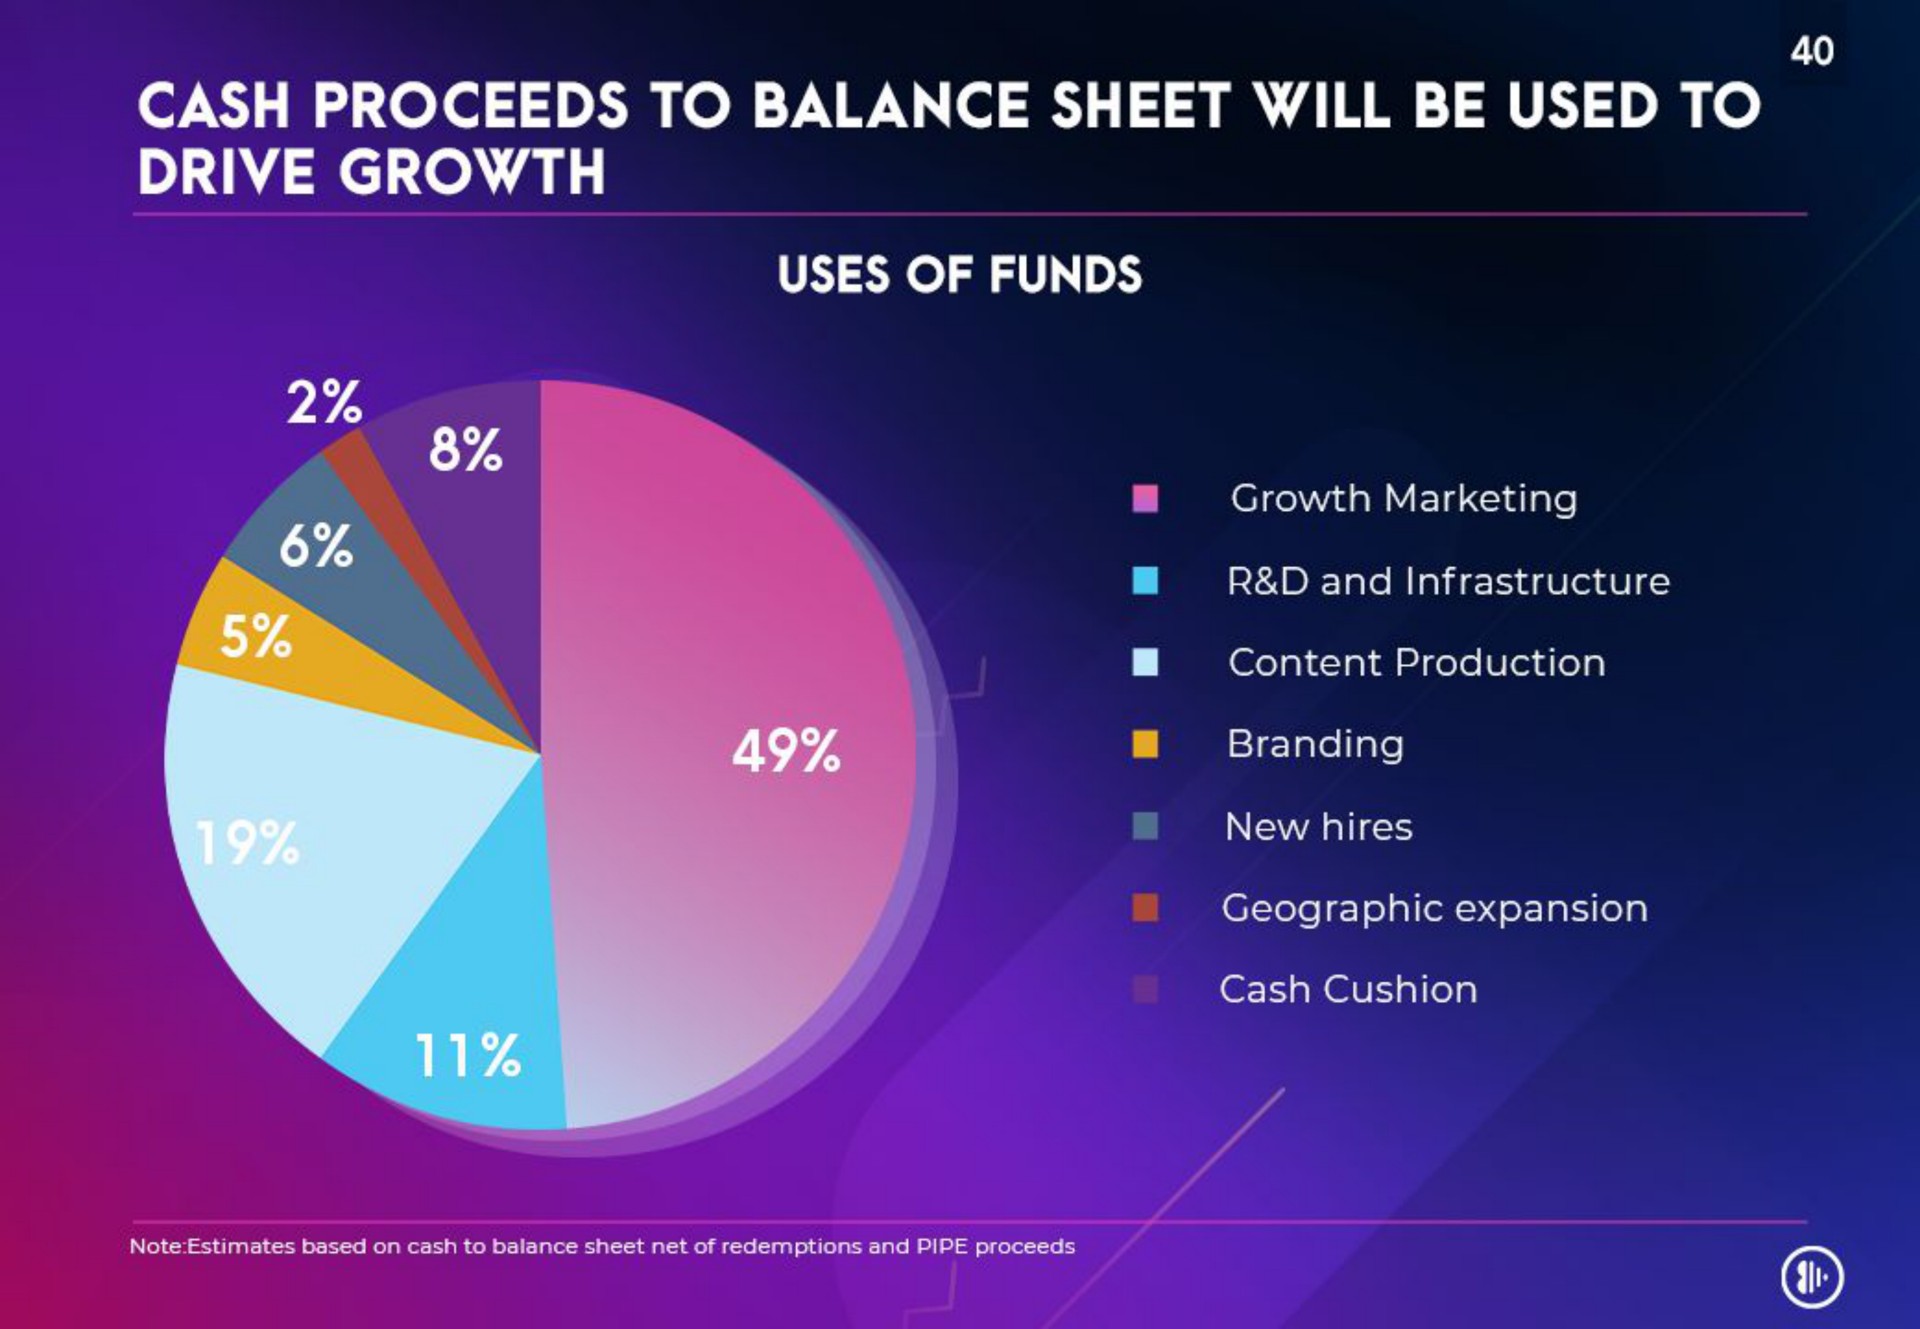 cash proceeds to balance sheet will be used to drive growth | Anghami